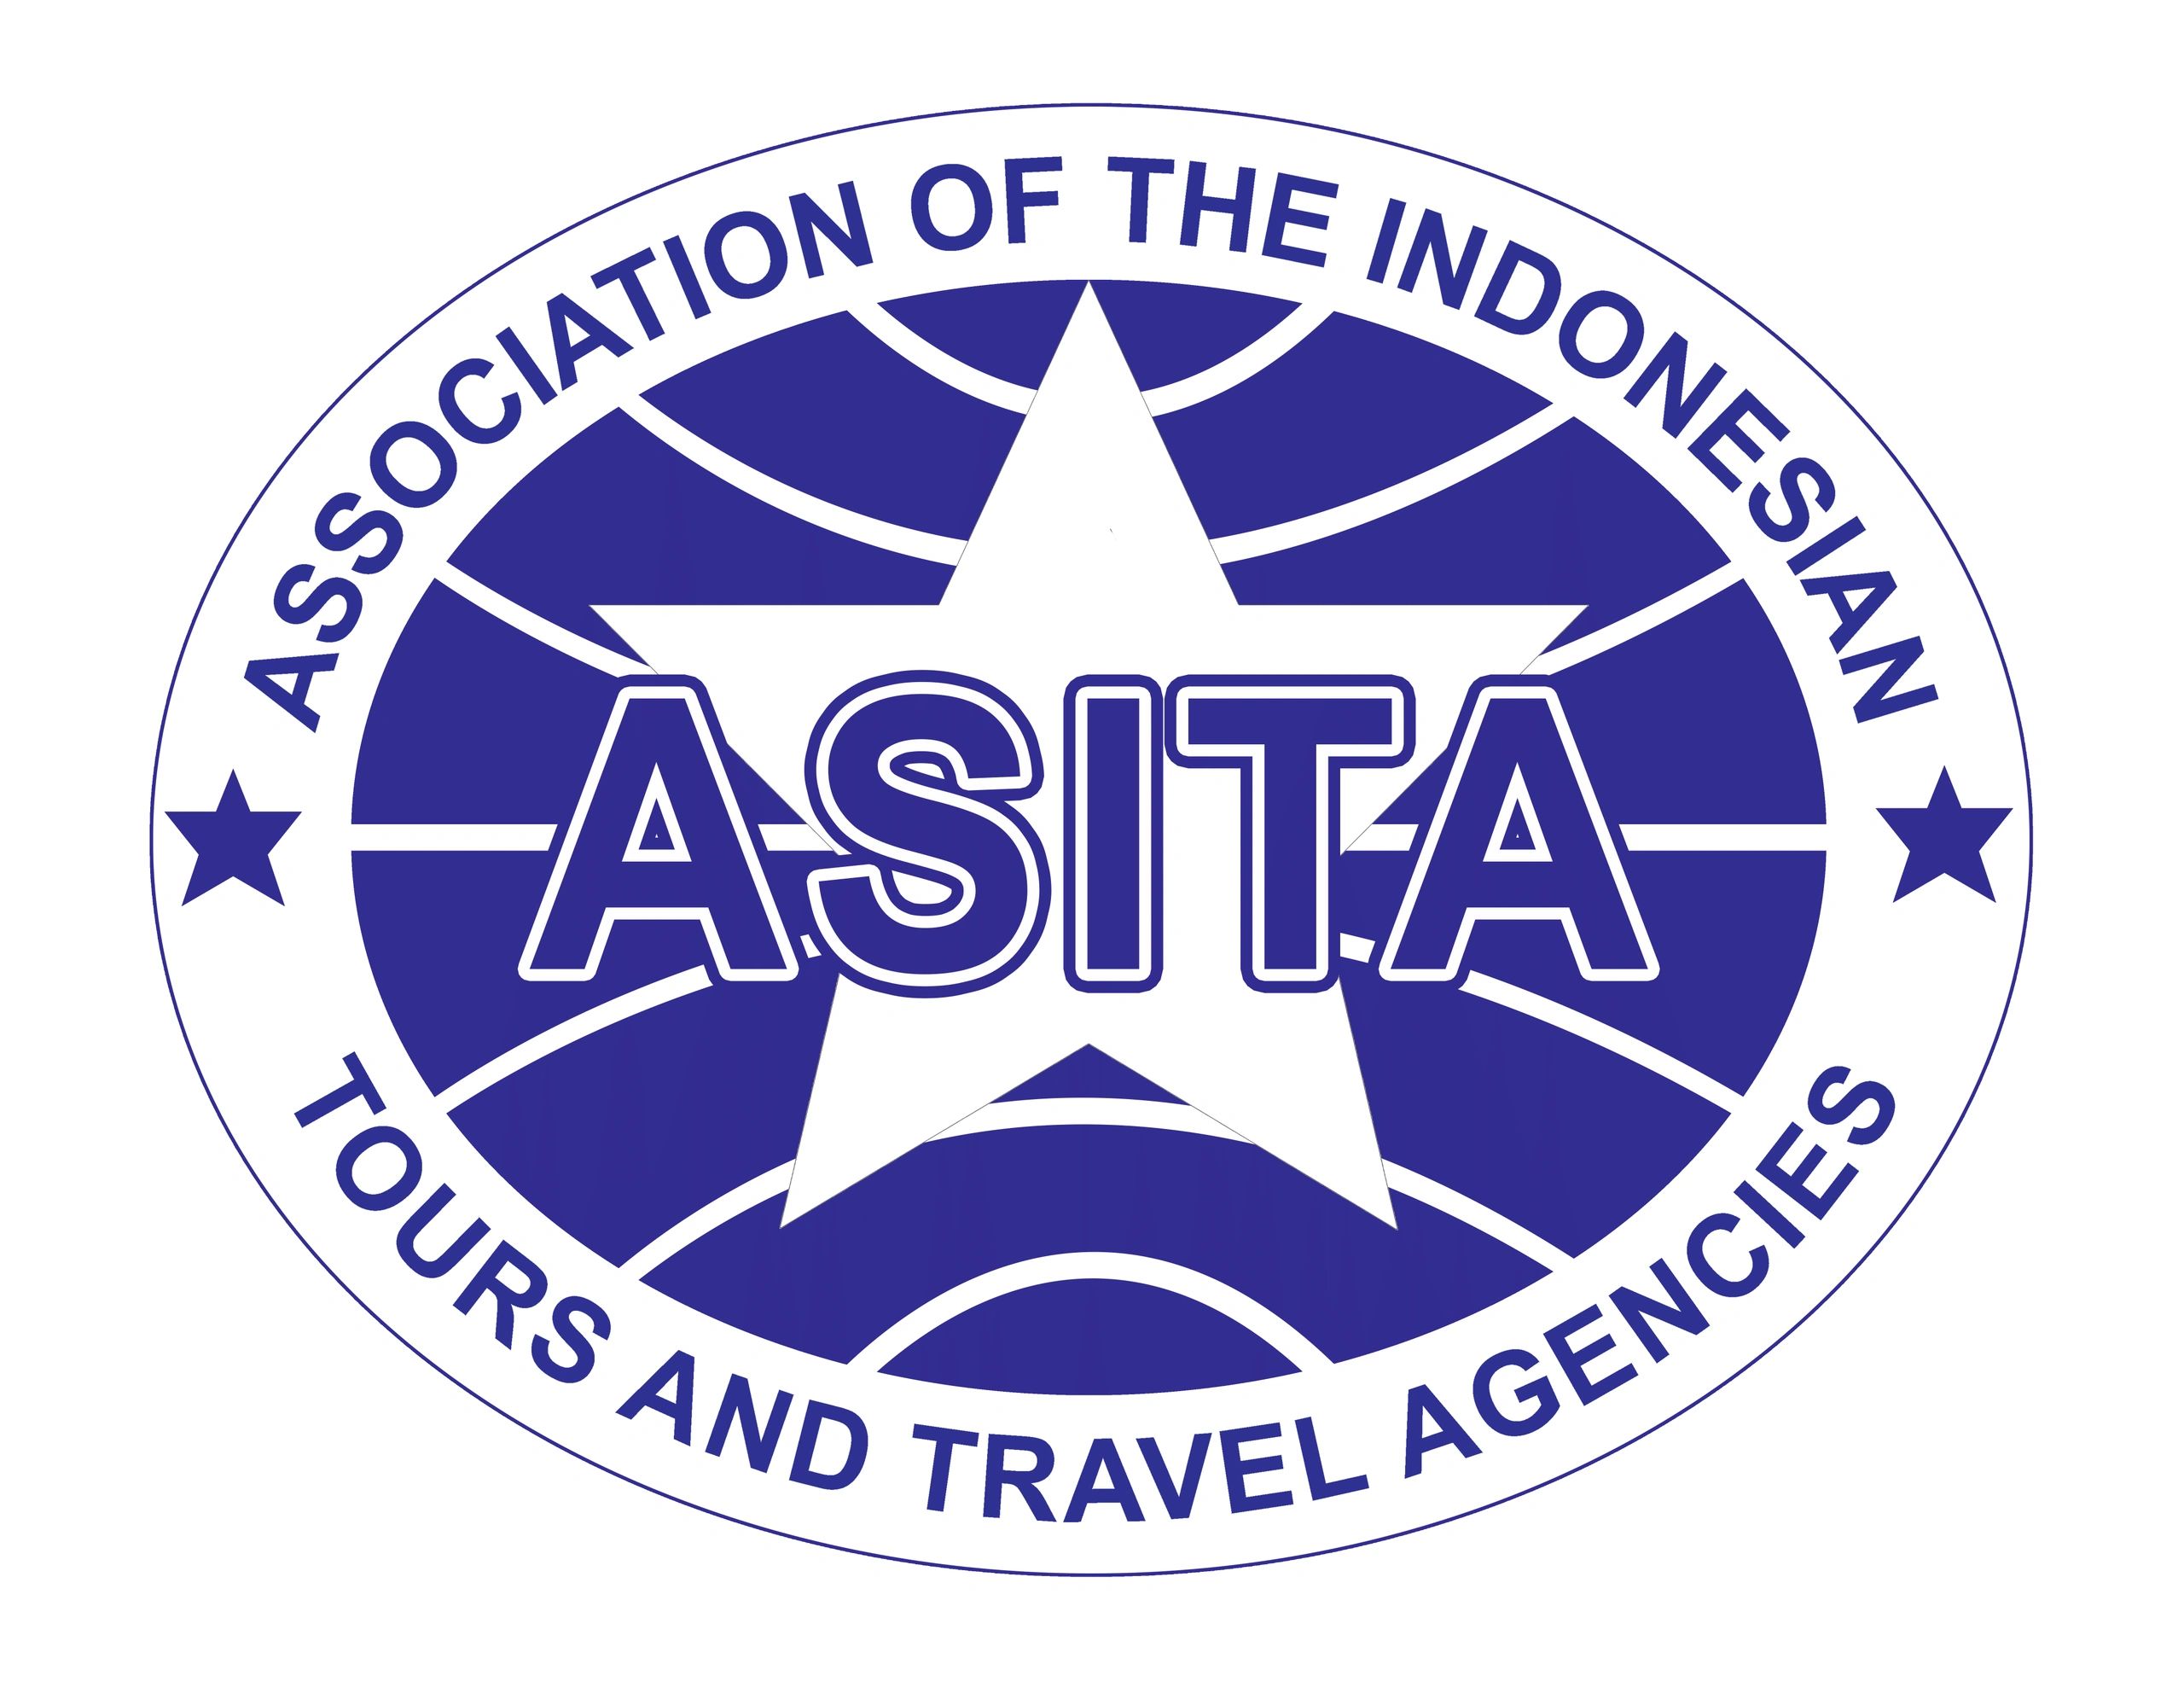 Logo ASITA (Association of the Indonesian Tours and Travel Agencies)